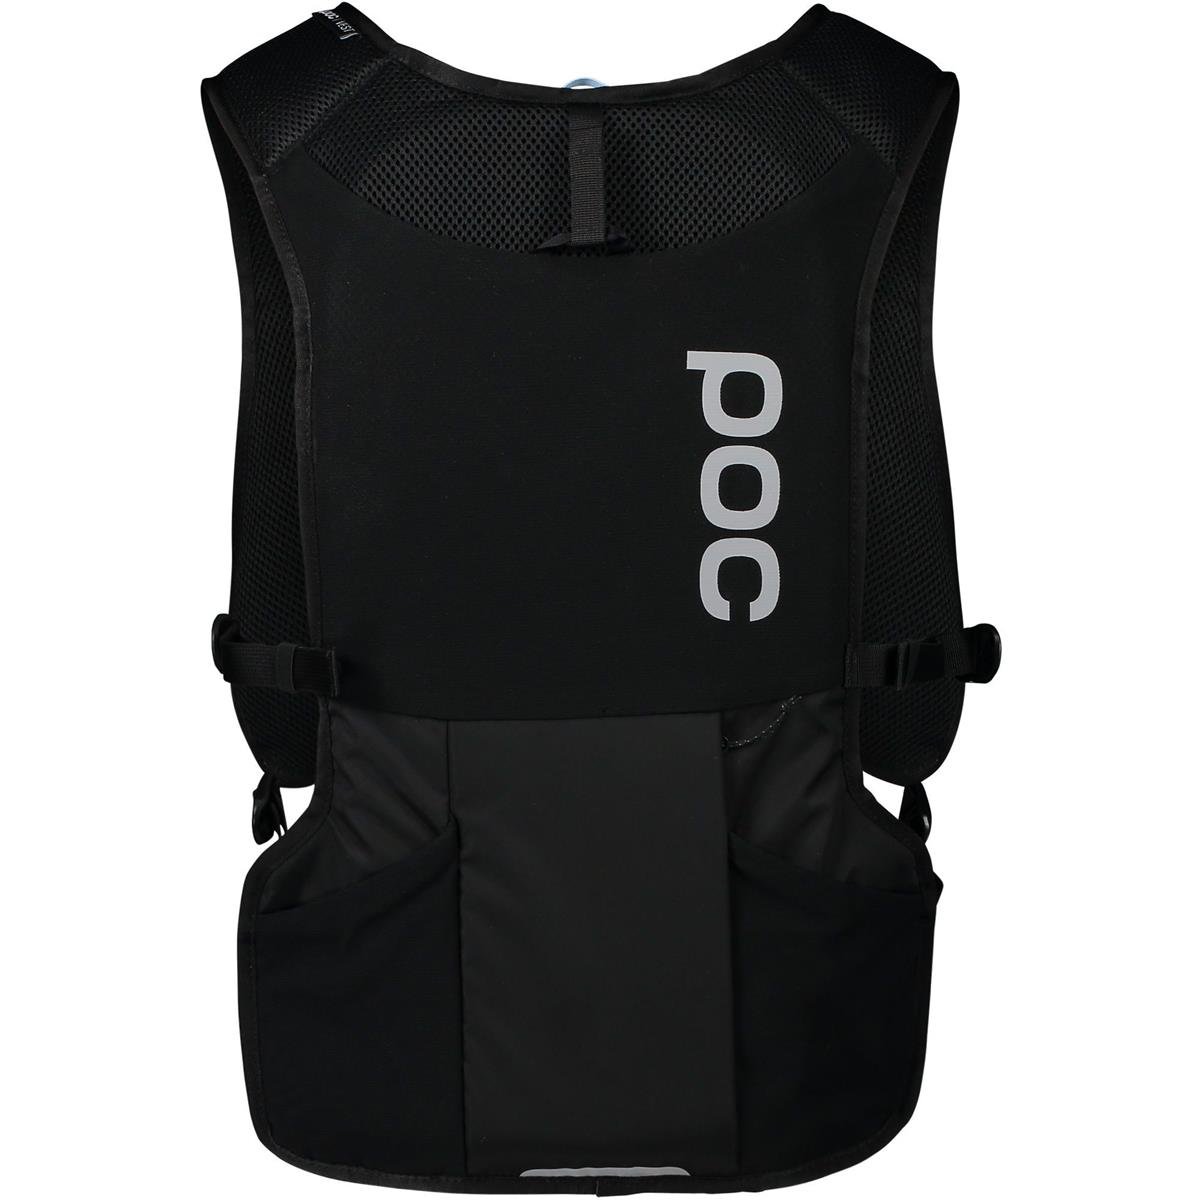 POC Protector Backpack with Hydration System Compartment Column VPD Vest Uranium Black